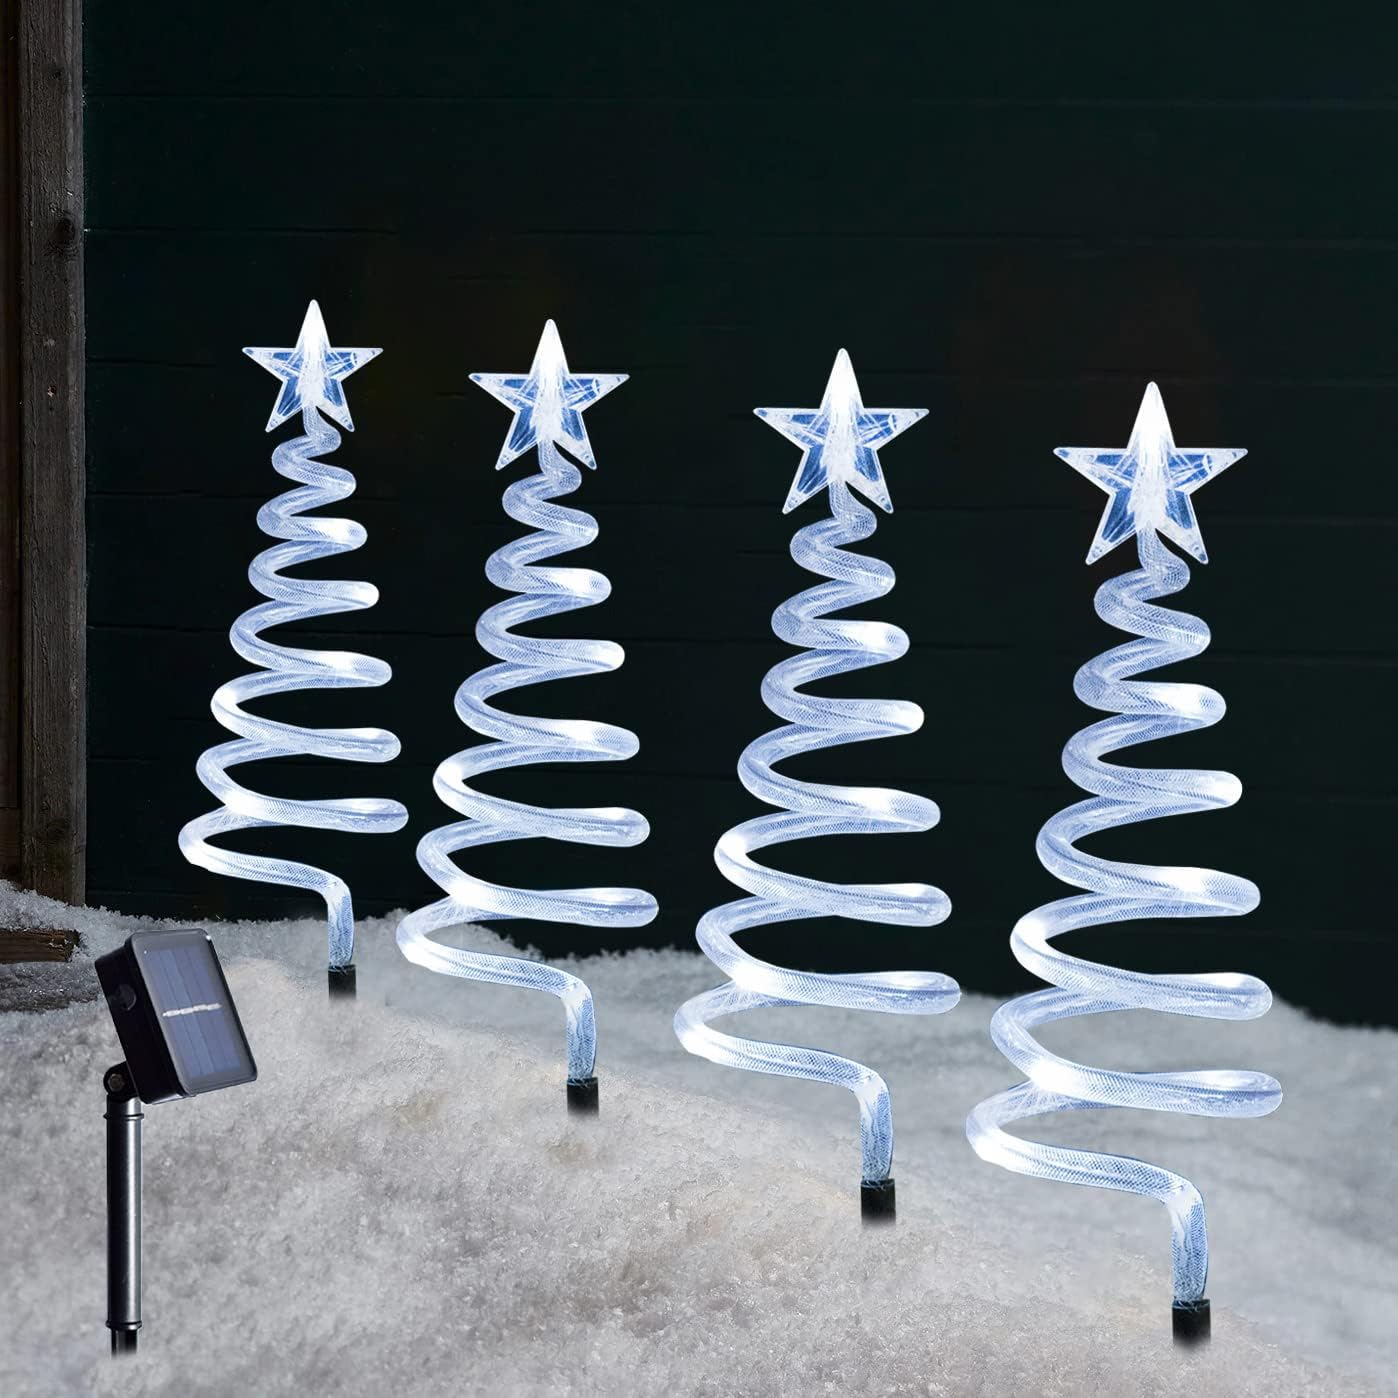 SunnyPark Set of 4 Spiral Christmas Tree Pathway Lights, Solar Powered Pre-lit 40 LEDs Pathway Markers Stake Outdoor Christmas Decoration